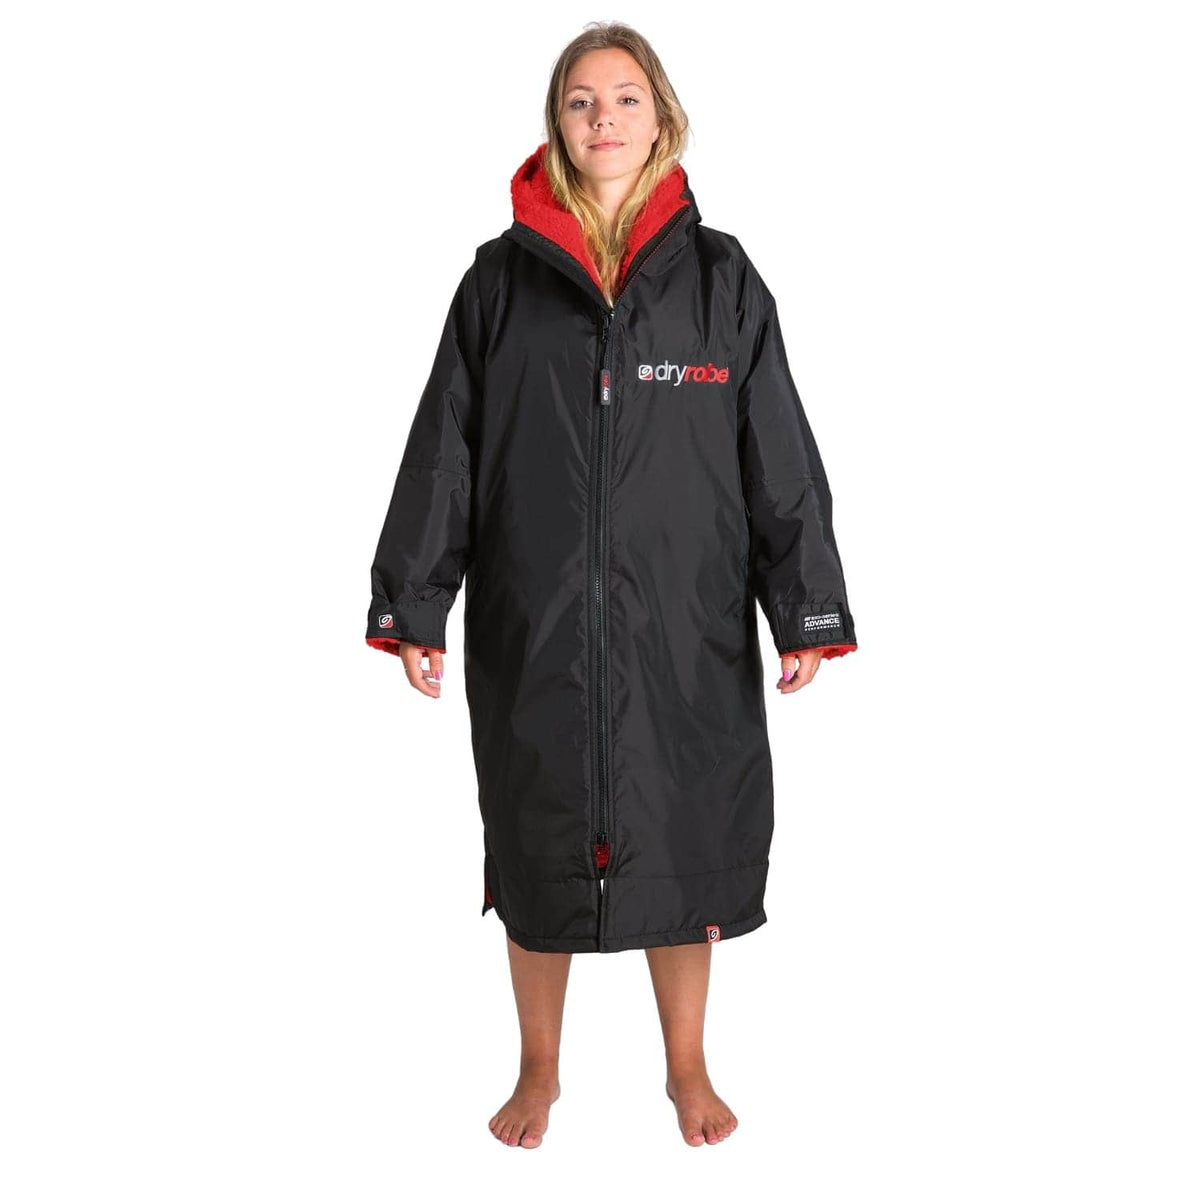 Dryrobe Advance Long Sleeve Drying &amp; Changing Robe - Black/Red - Changing Robe Poncho Towel by Dryrobe